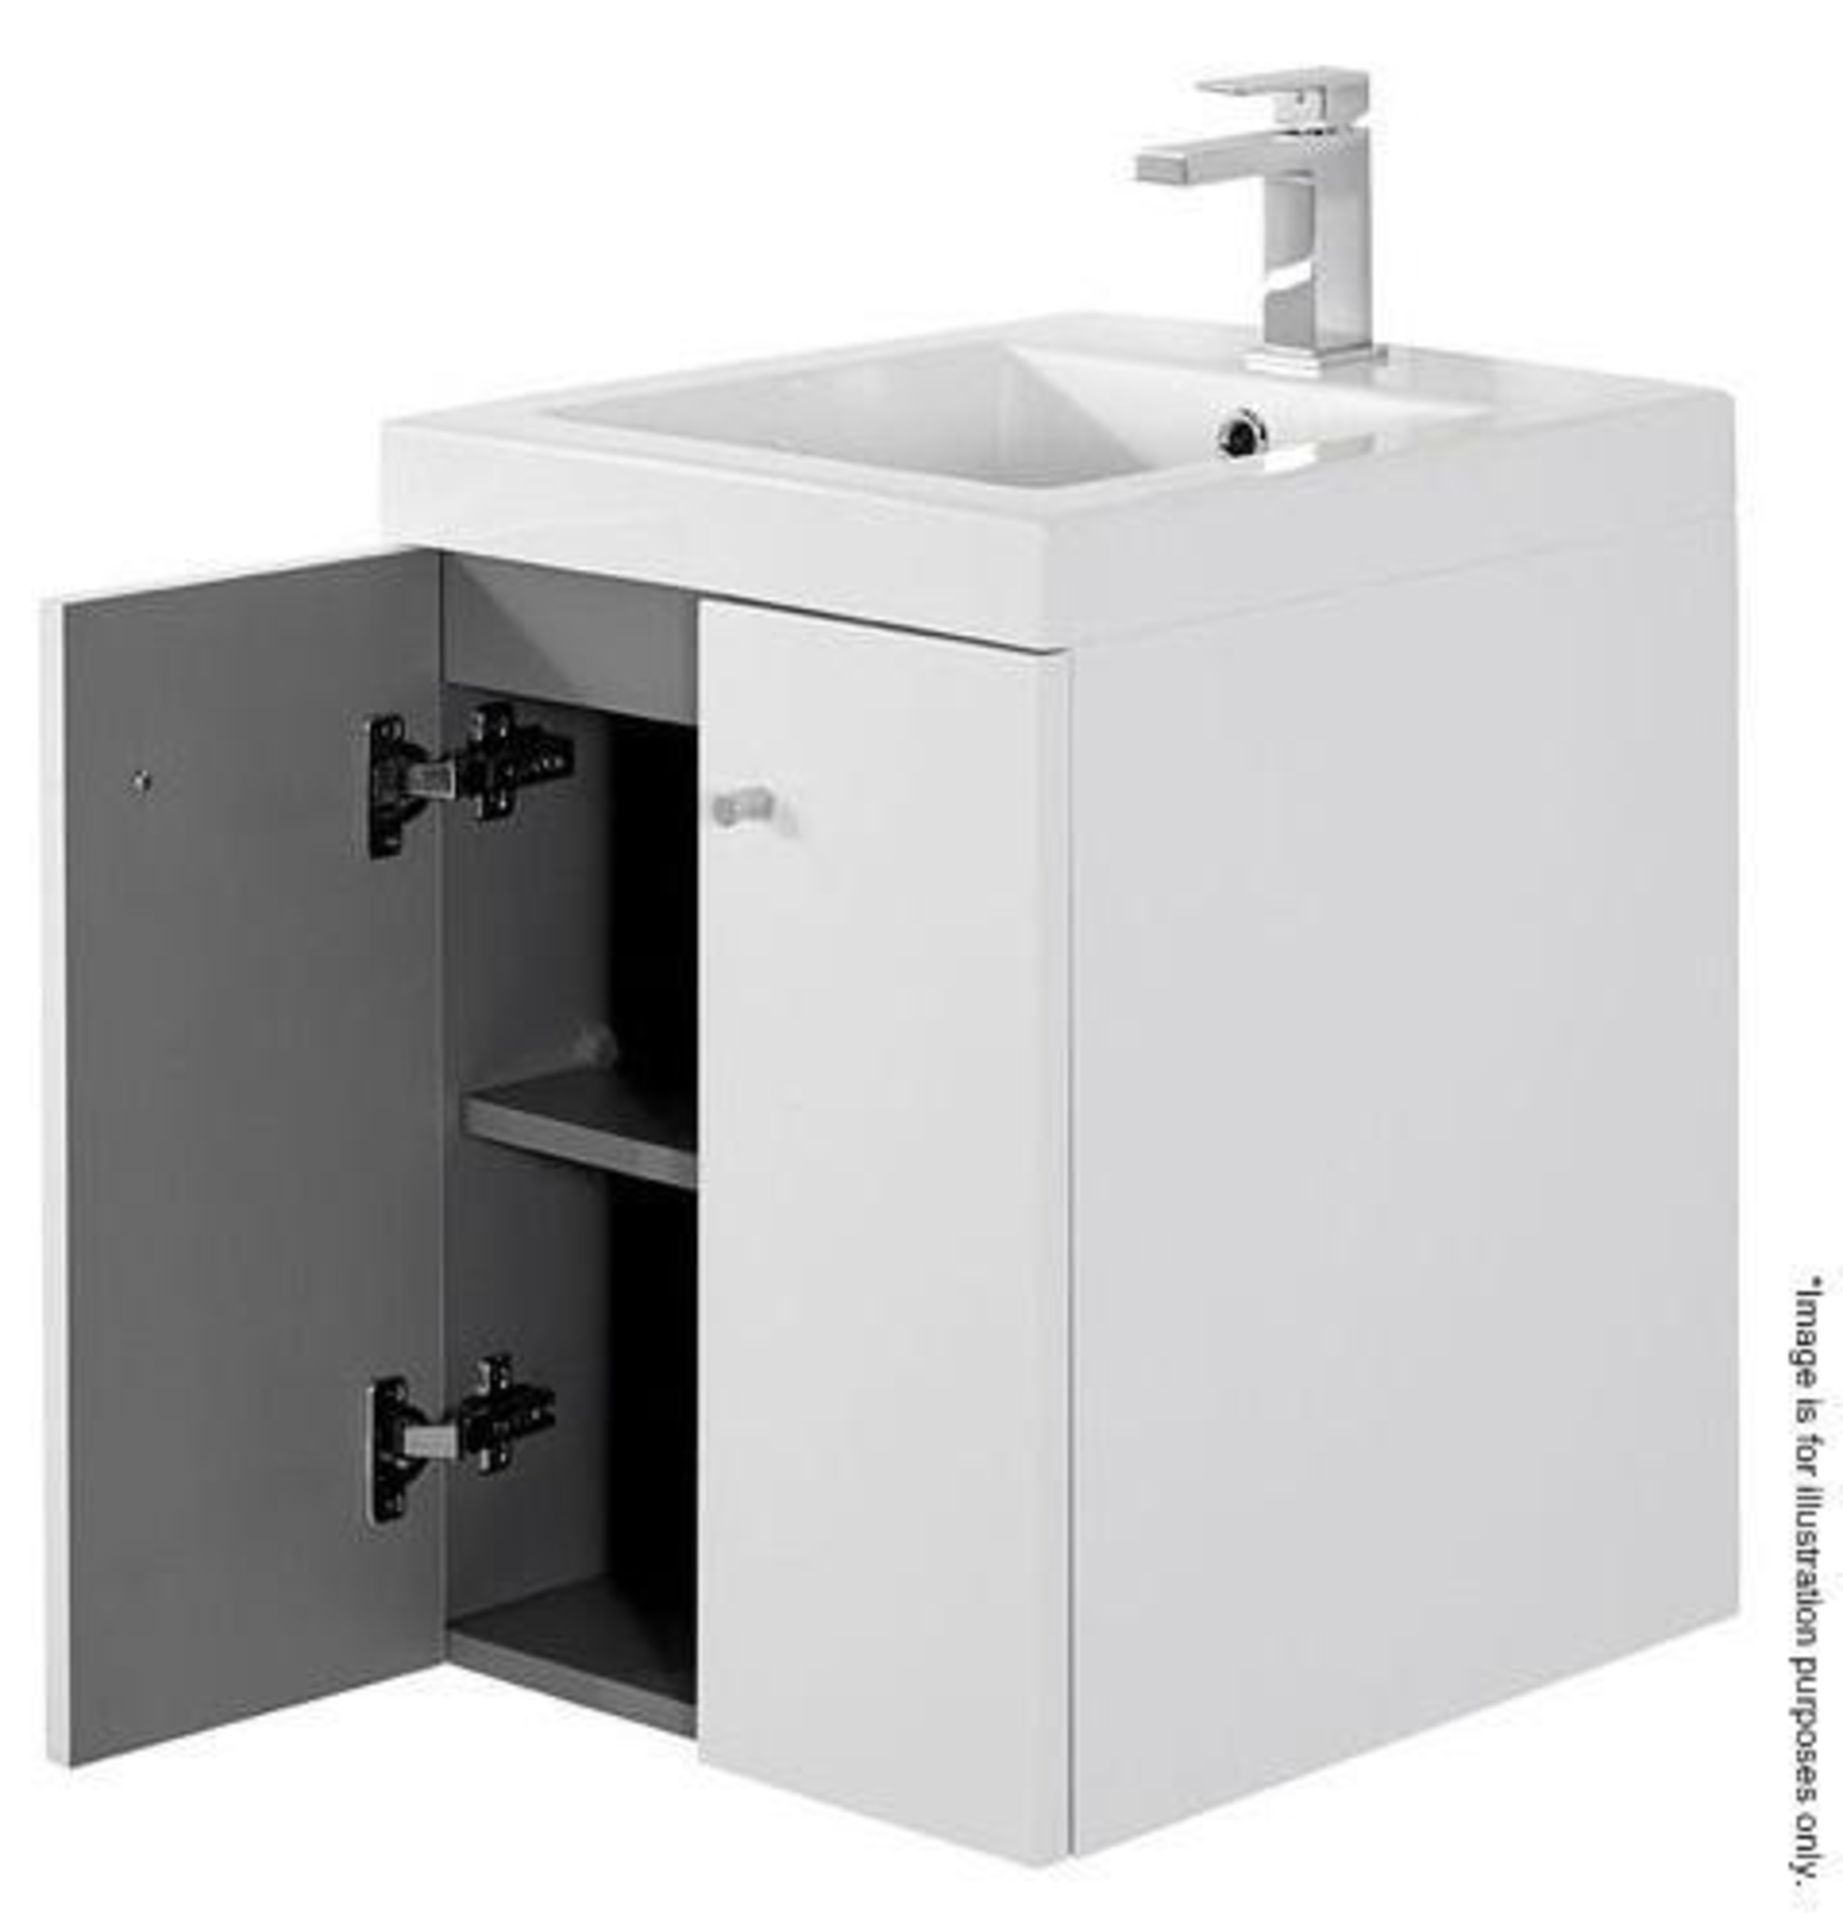 5 x Alpine Duo 400 Wall Hung Vanity Units In Gloss White - Brand New Boxed Stock - Dimensions: H49 x - Image 5 of 5